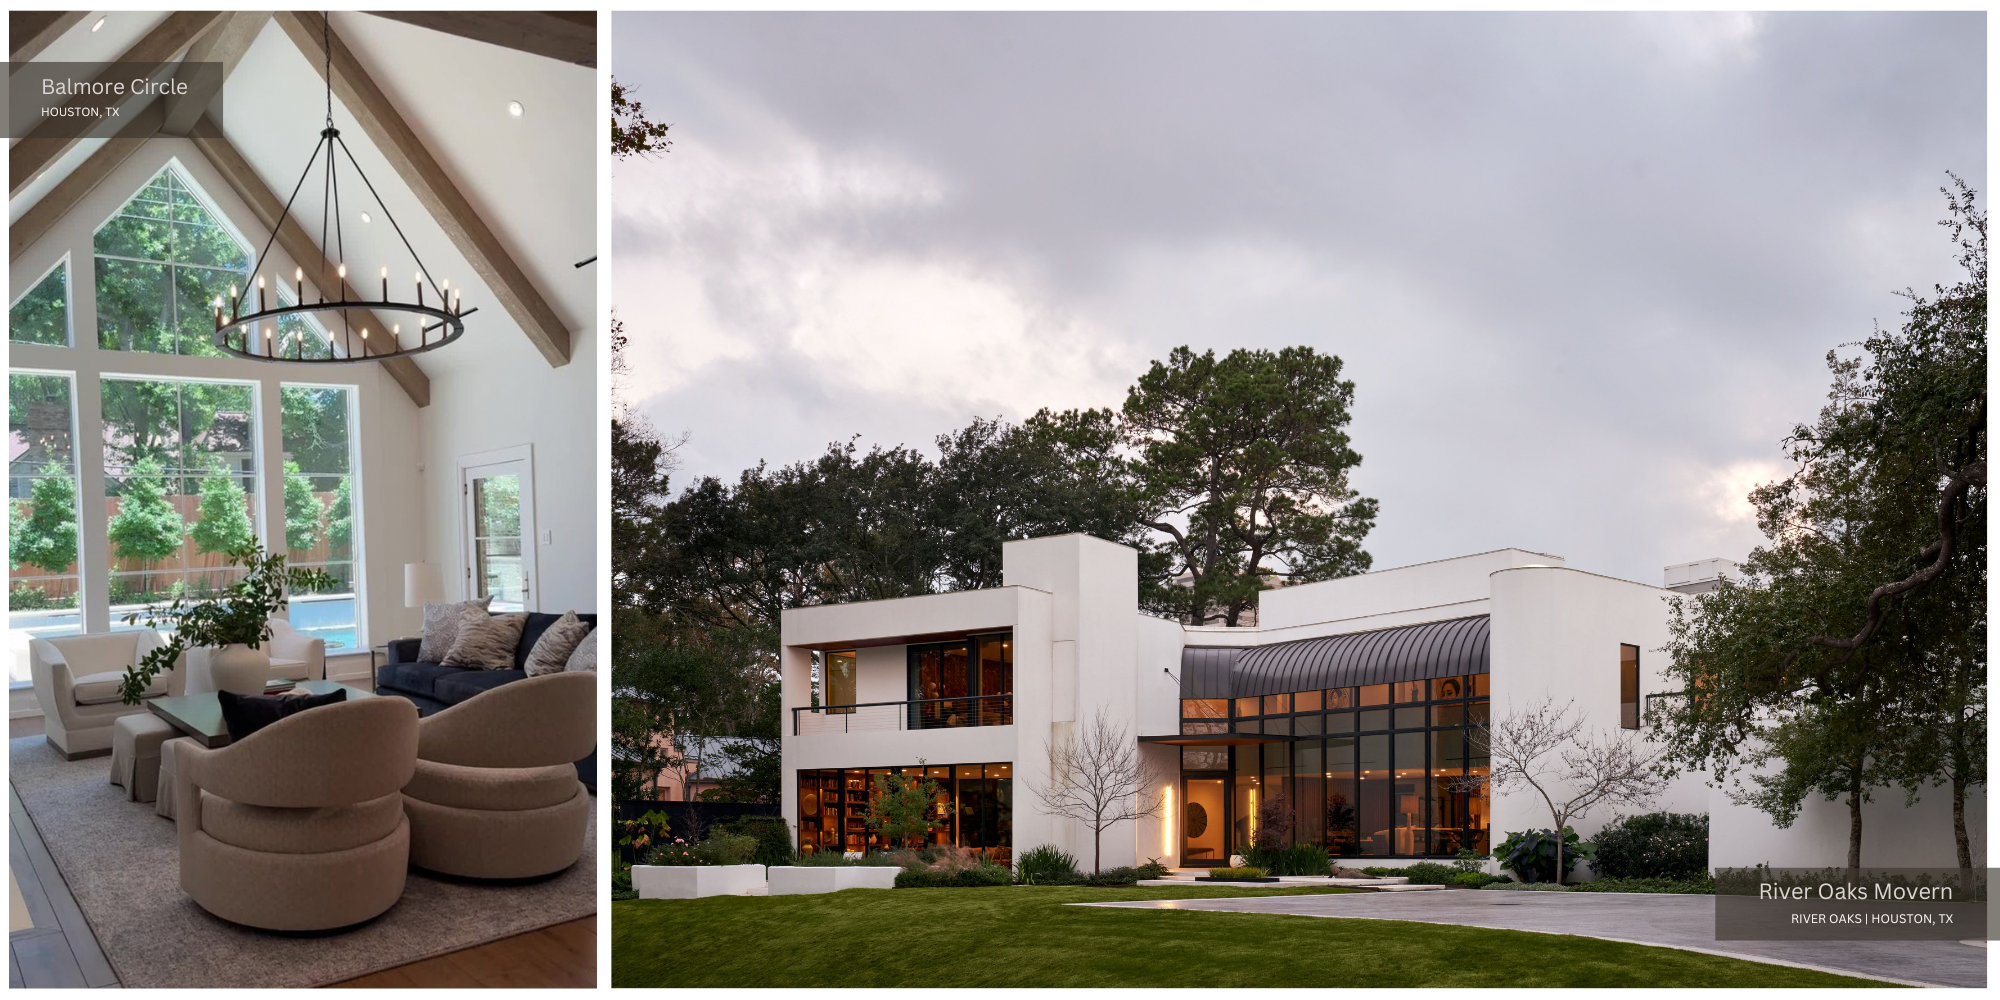 The vaulted ceiling living room at Balmore and the exterior of Bauhaus-style River Oaks Modern.